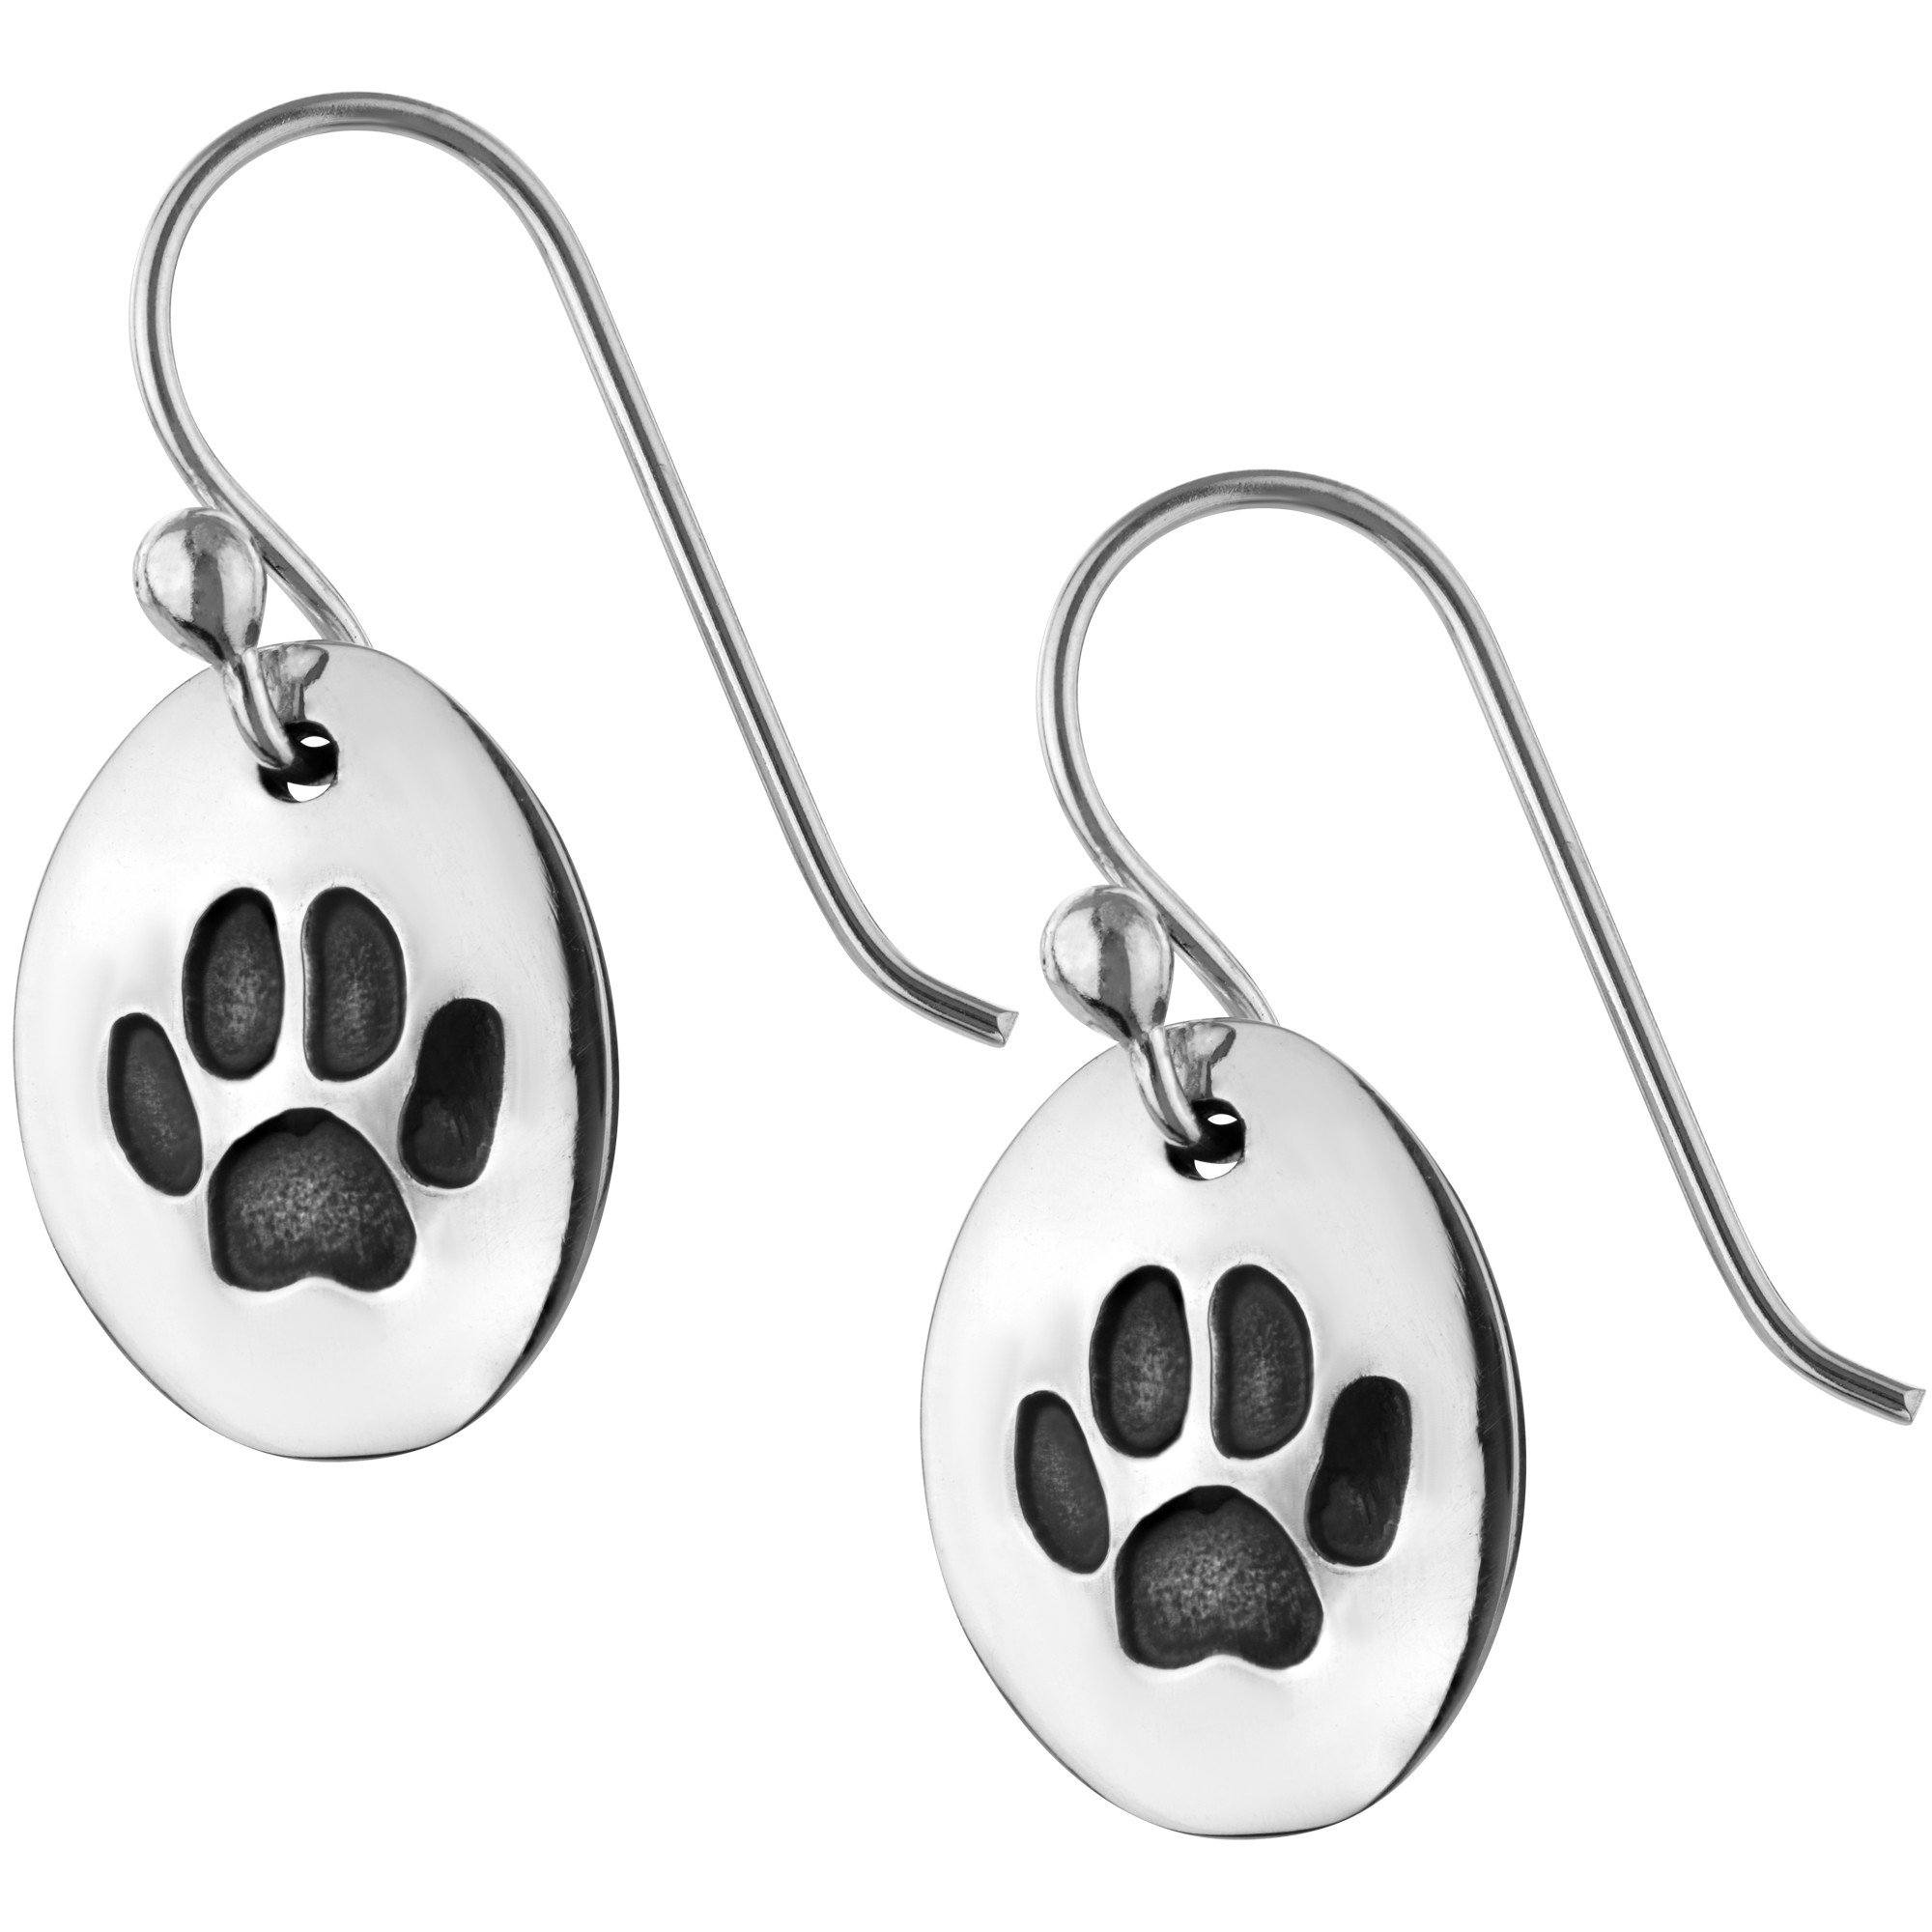 Paw Print Cut Out Sterling Earrings